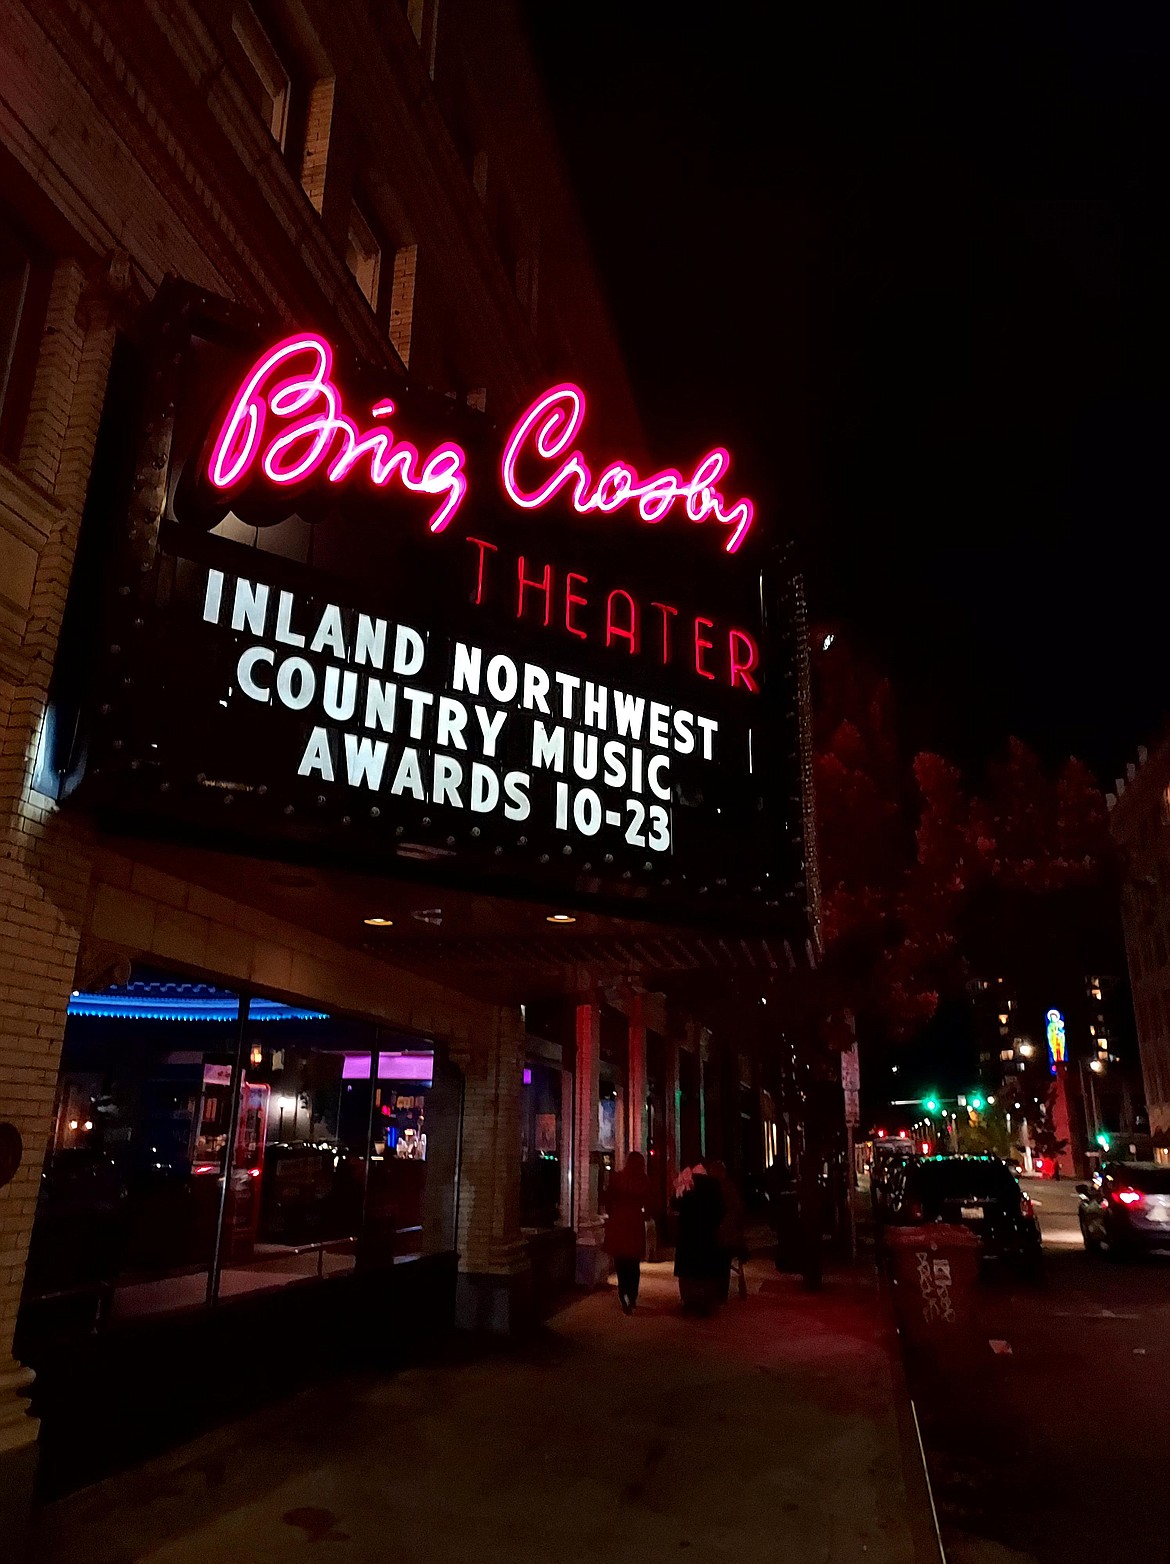 The marquee sign of the Bing Crosby Theater showcasing the Inland Northwest County Music Awards event on Oct. 23.